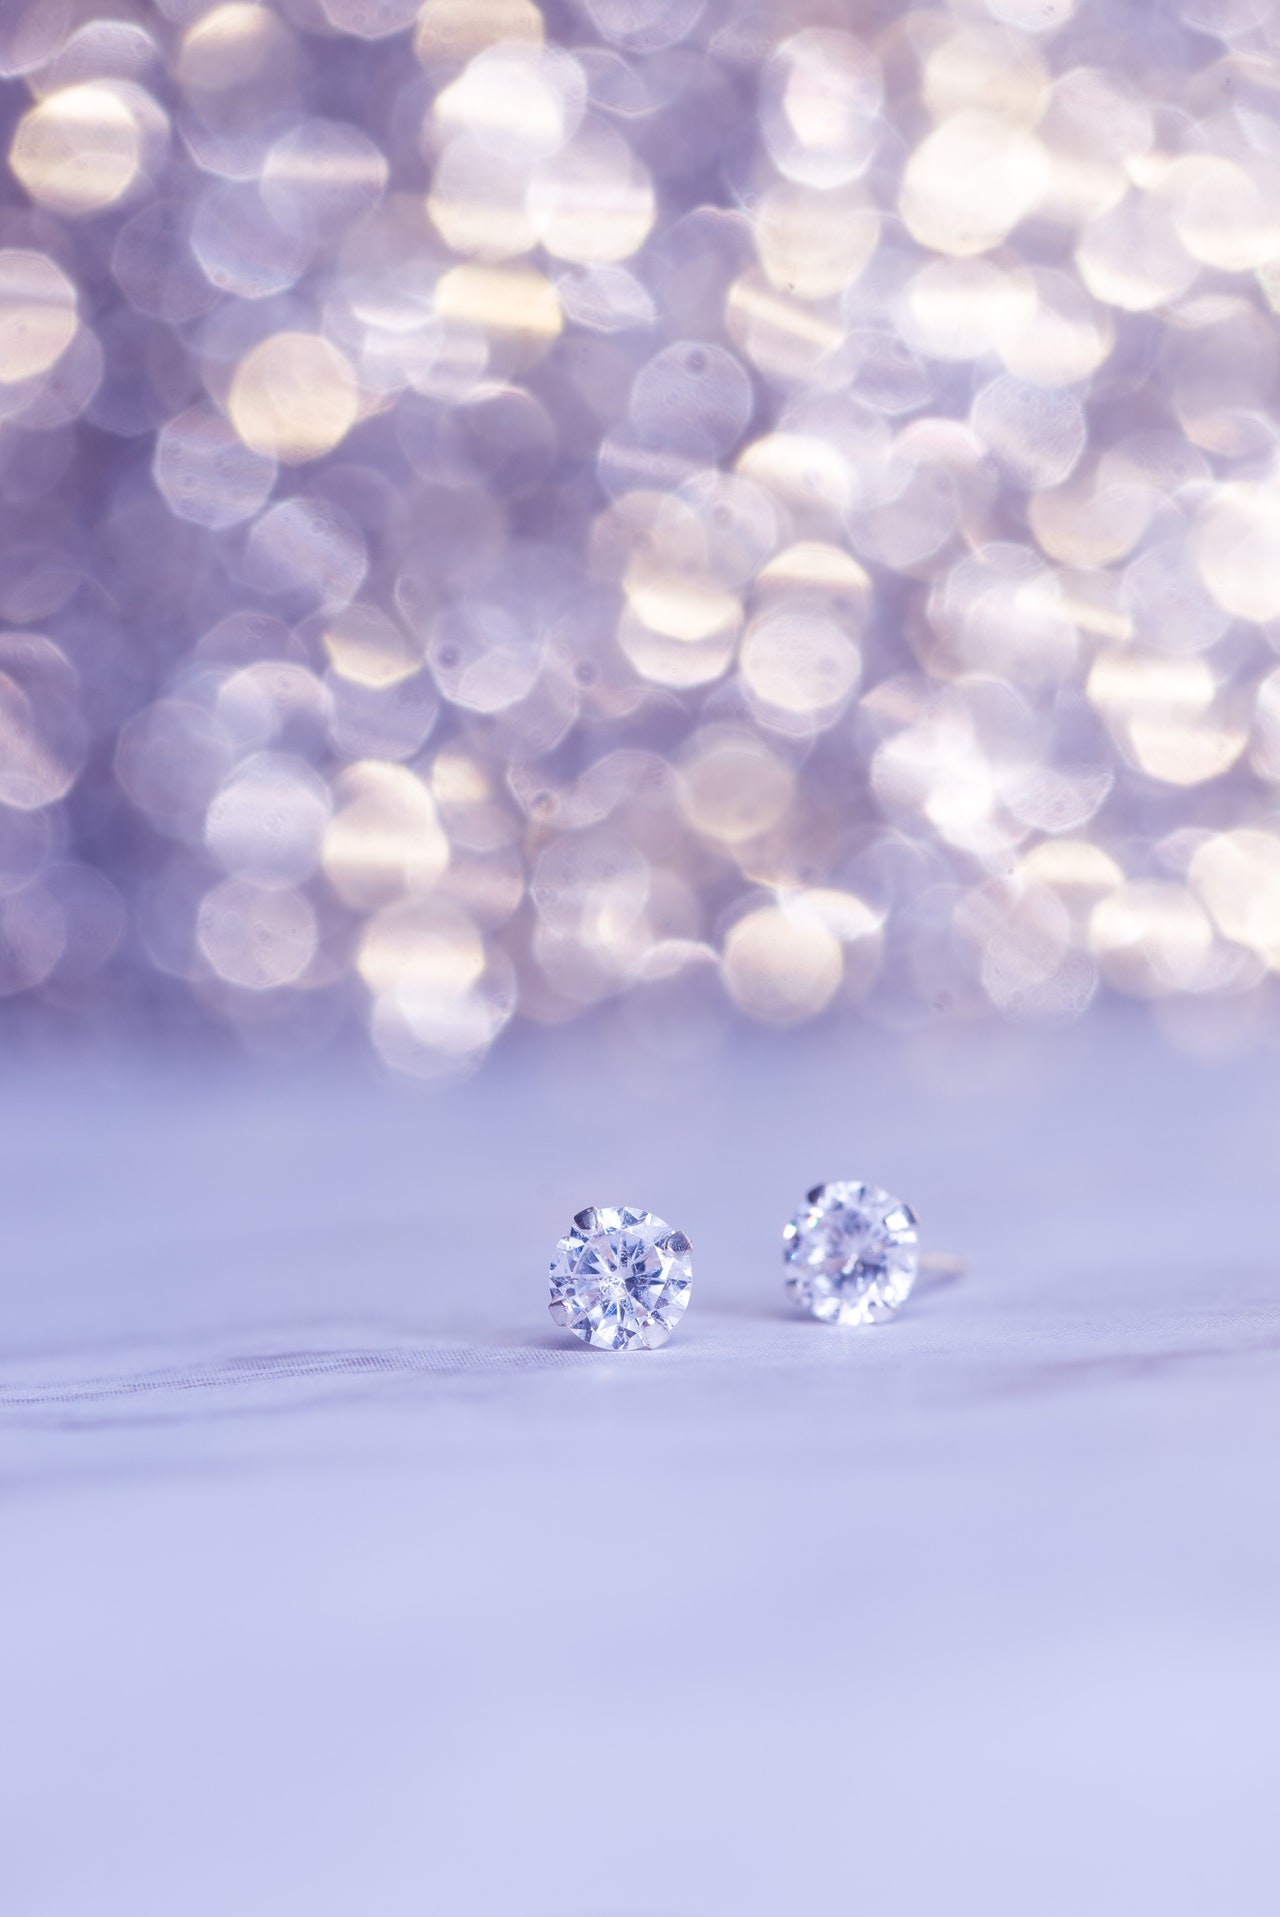 Why It Makes Sense To Buy Diamonds From A Wholesaler